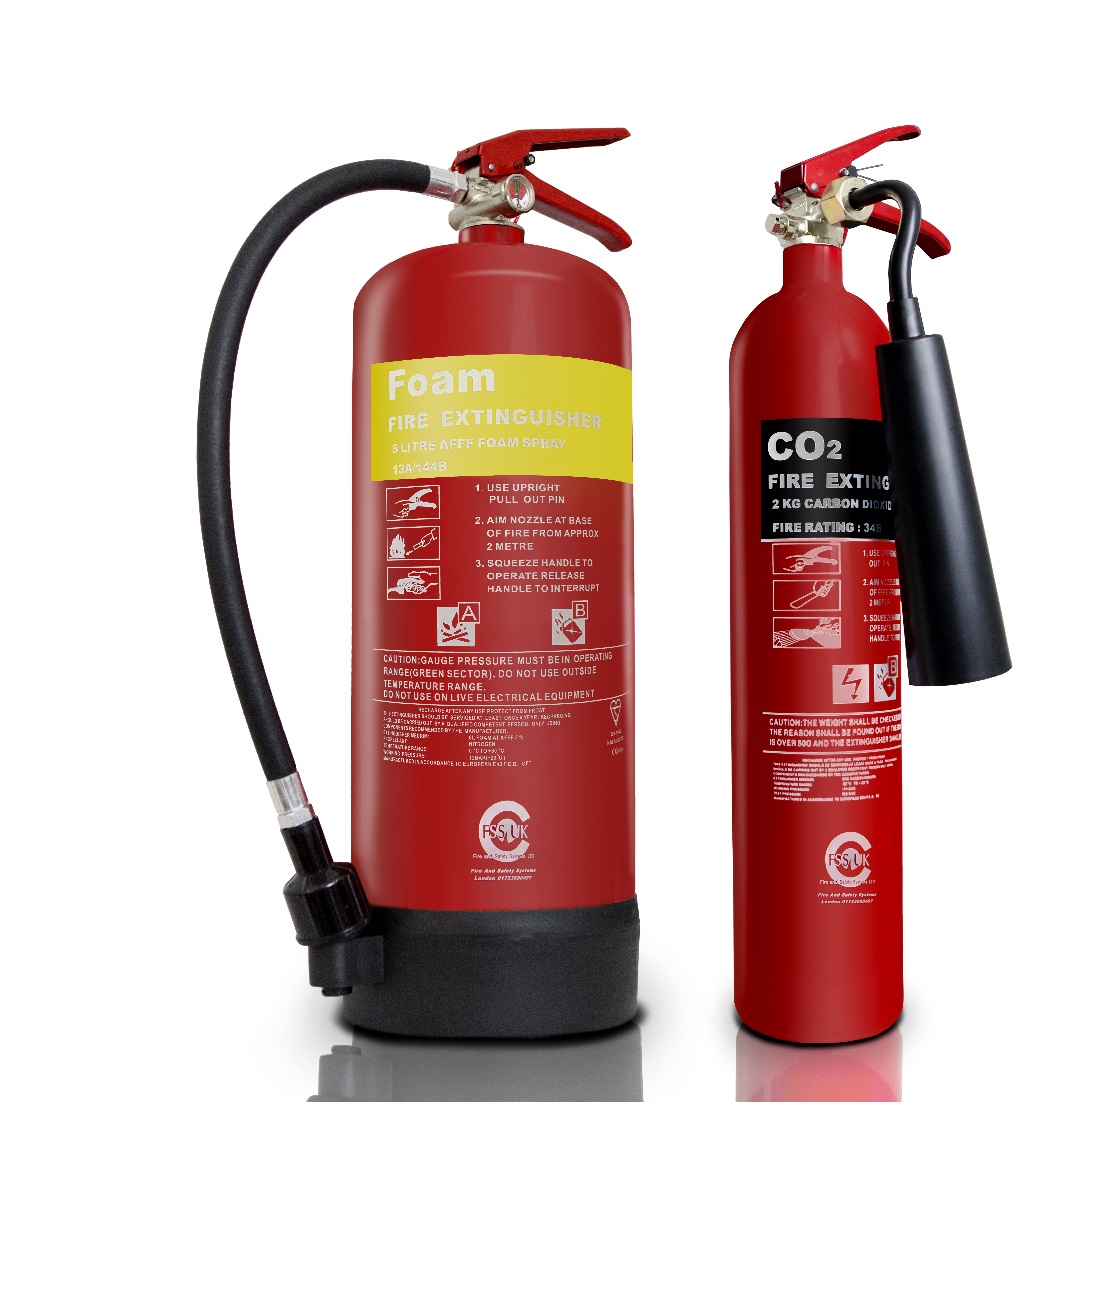 Green Fire Extinguisher | lupon.gov.ph